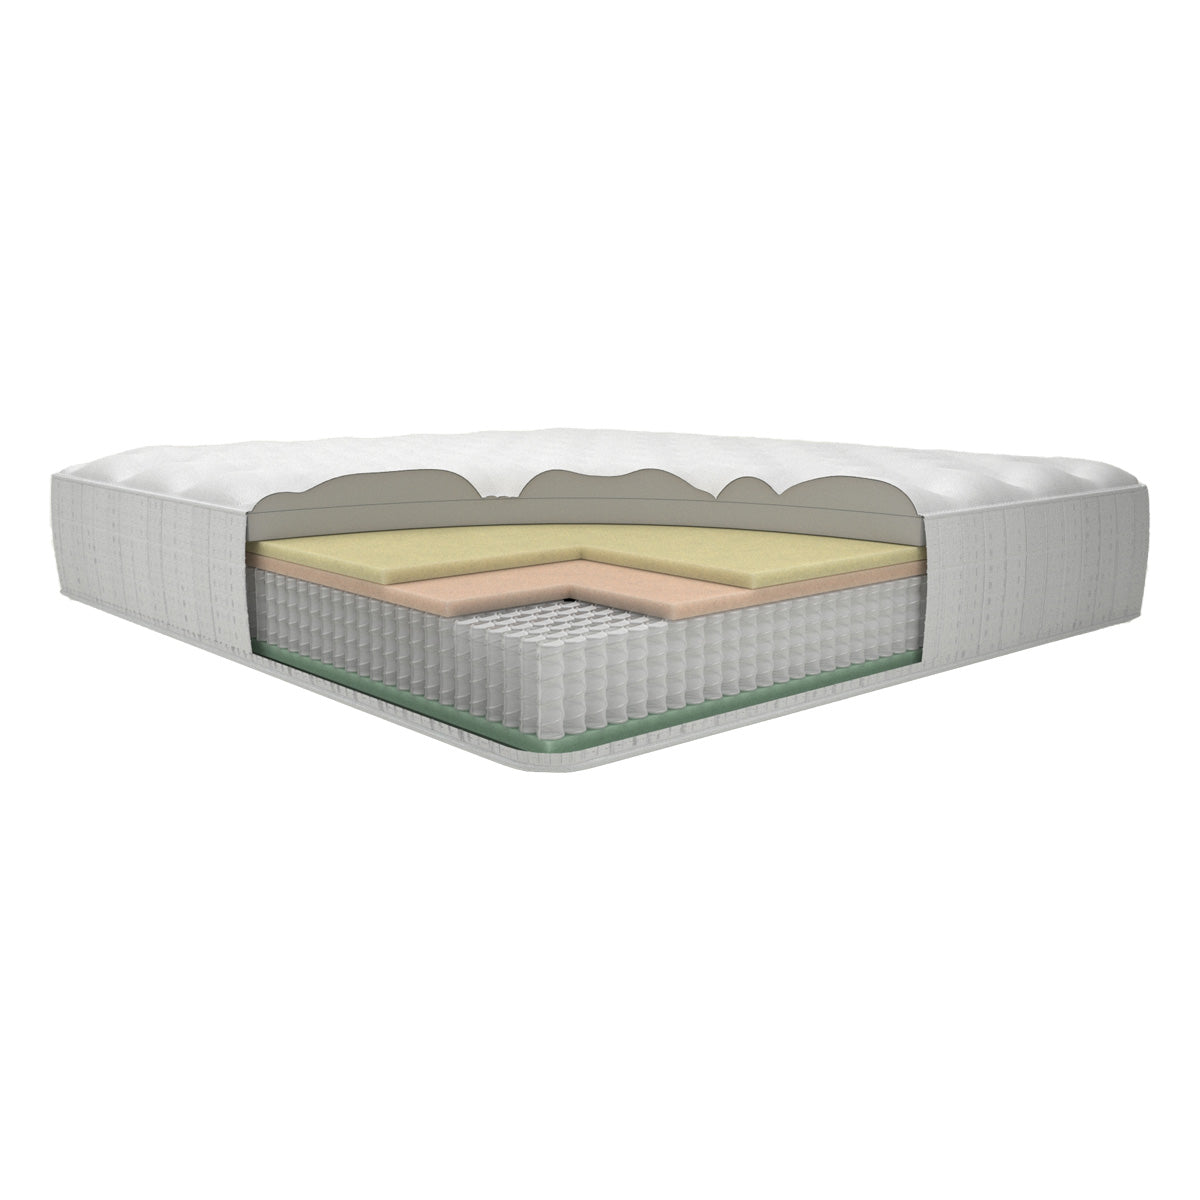 Hotel Collection Tight Top Mattress by Englander, Image showing the Materials used inside the Mattress